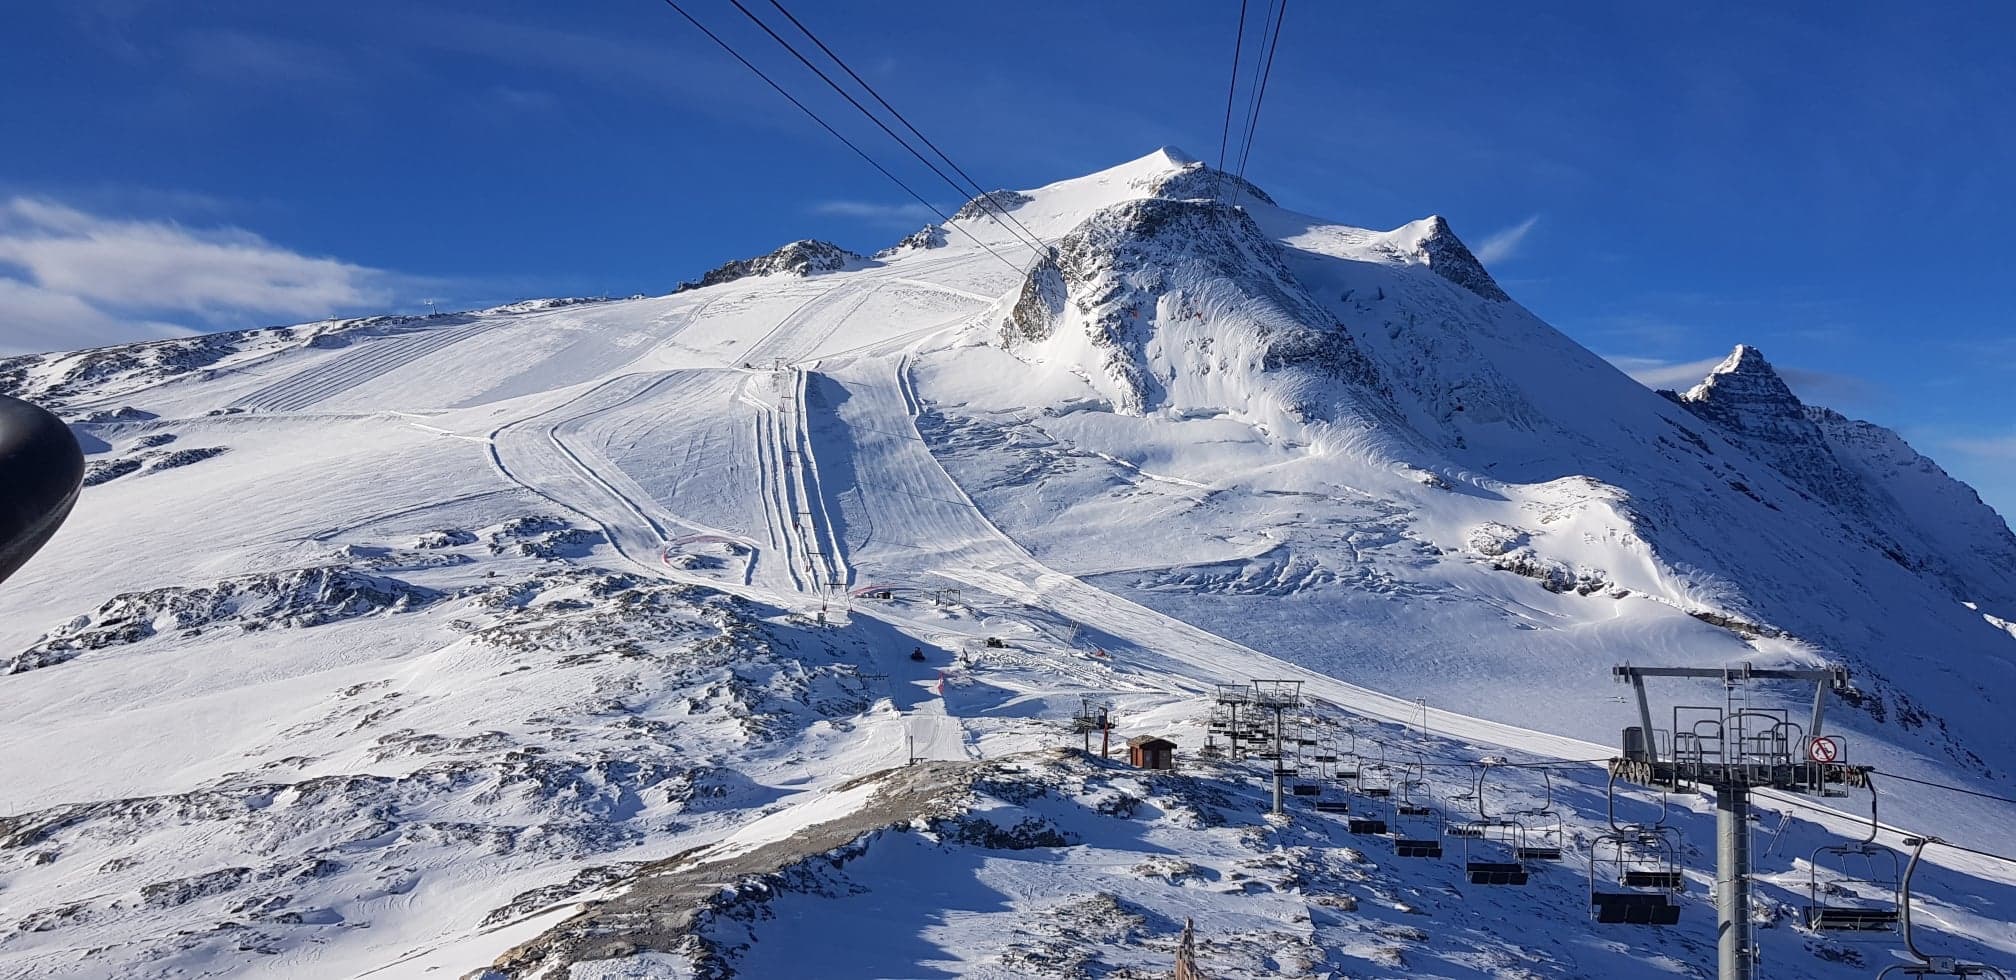 Tignes has announced the opening of the Grande-Motte glacier on October 19, 2019